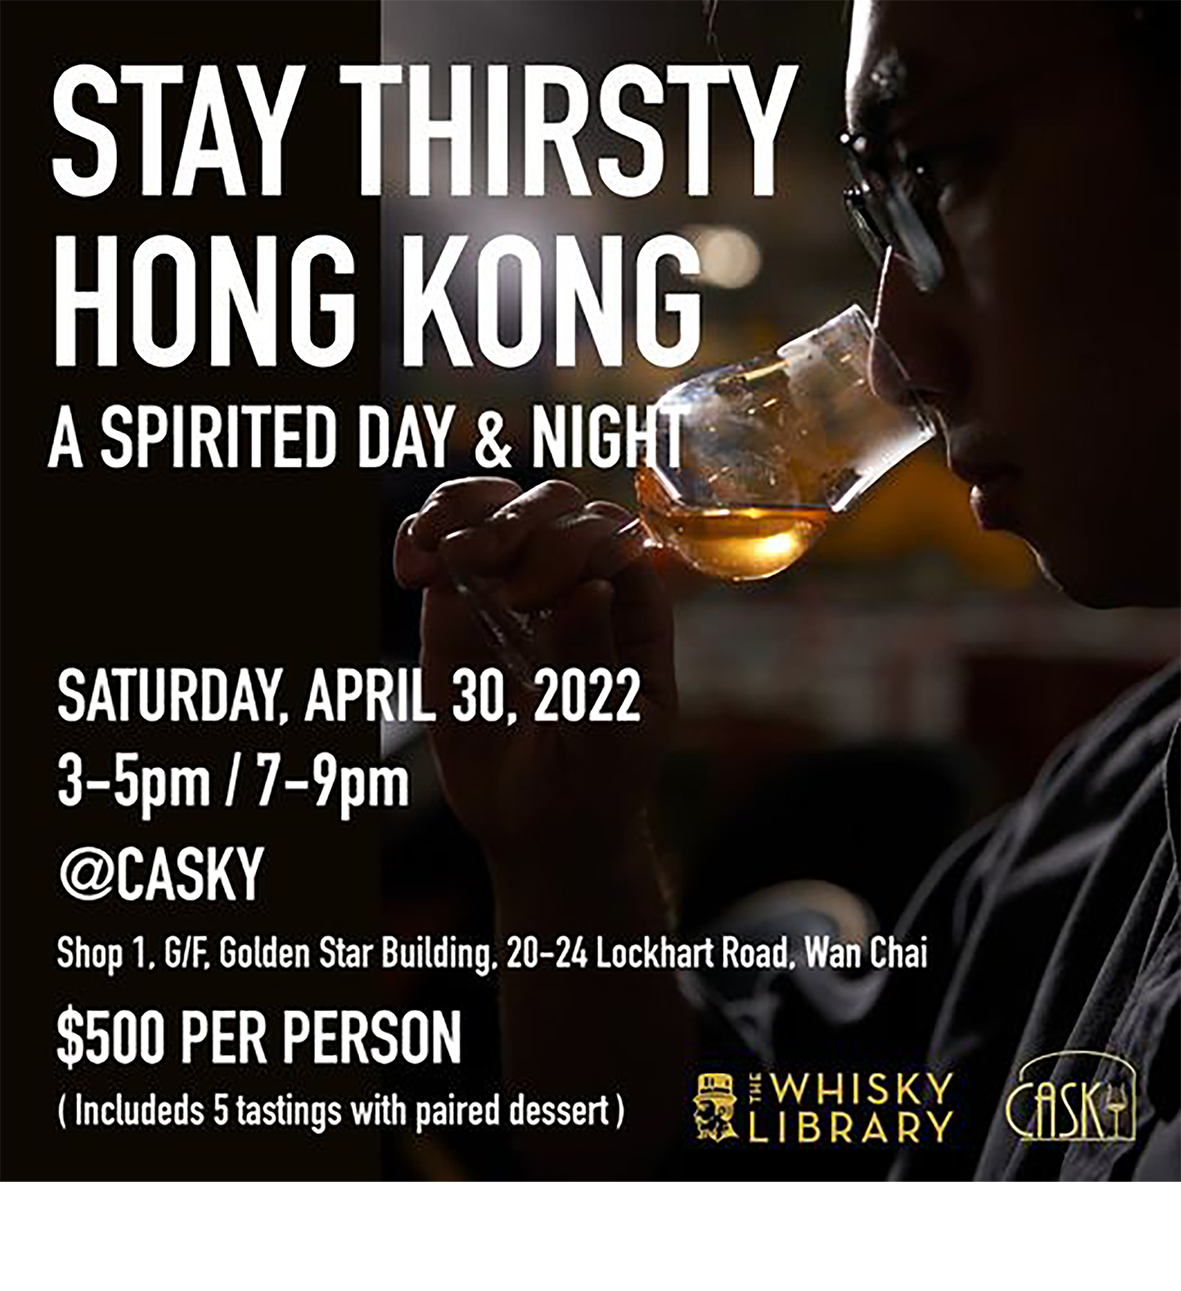 The Whisky Library x Casky tasting 終於重臨！